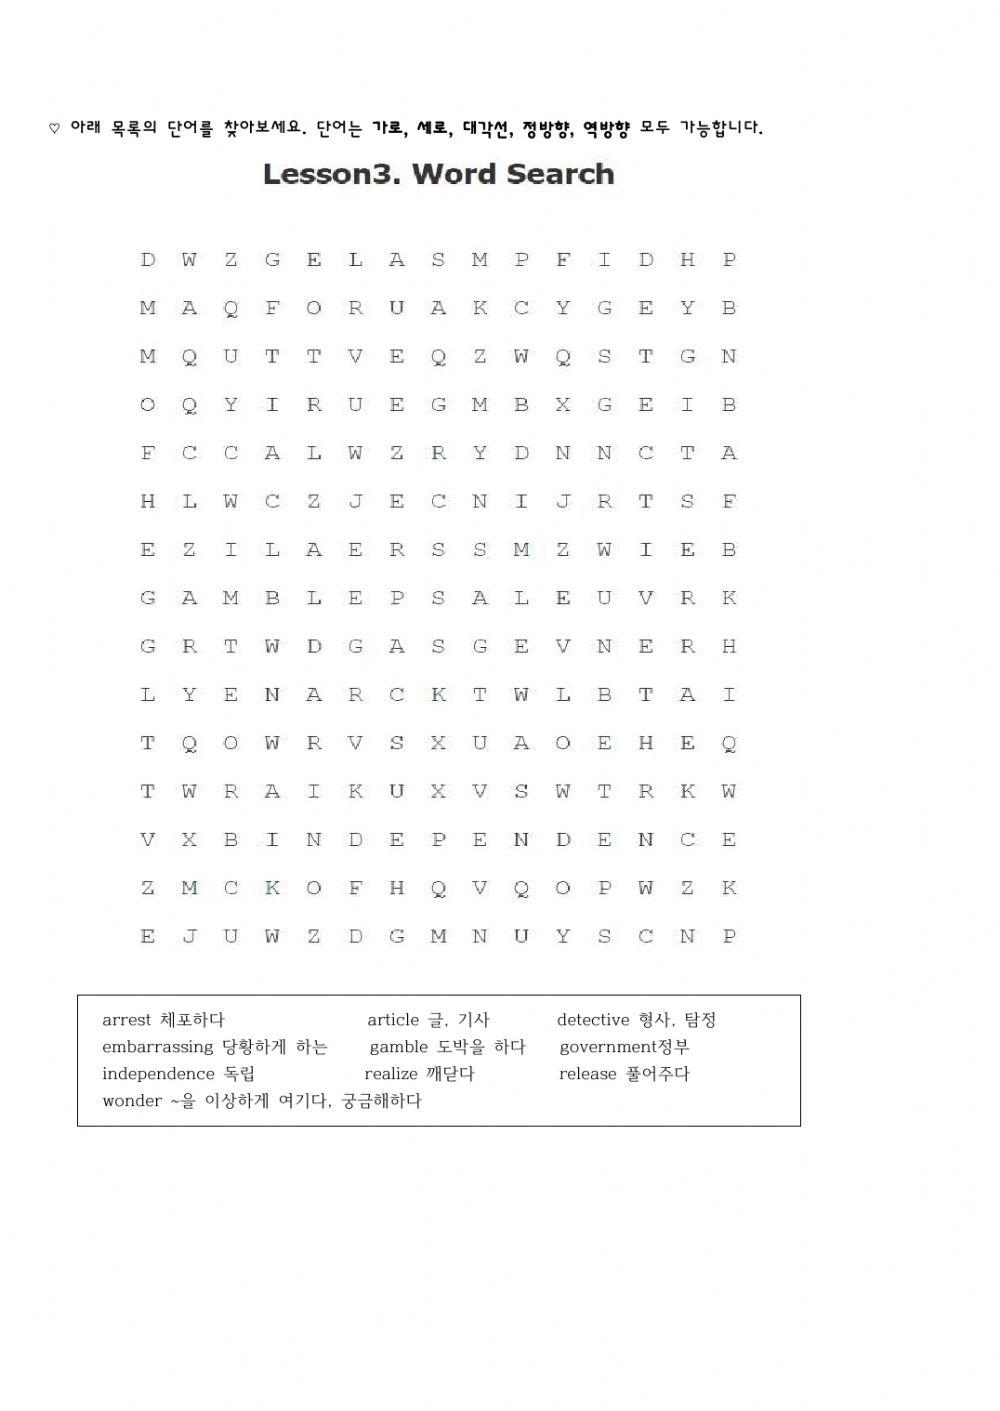 Lesson3. Word Search